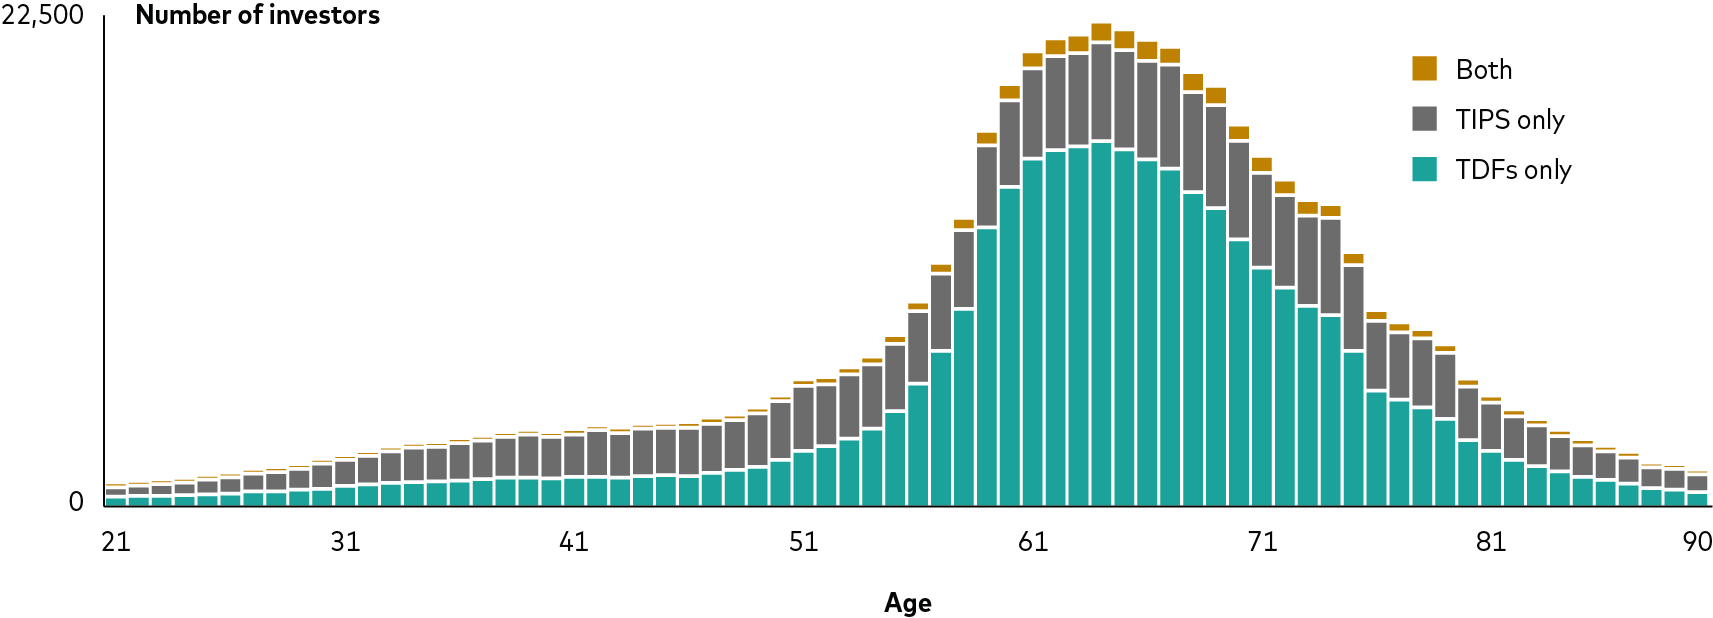 The number of investors from ages 21 through 90 who hold TIPS only, TDFs only, and both TDFs and TIPS. The number of investors who hold TIPS only increased modestly with age to around 60-80 and then decreased slightly. The number of investors who hold TDFs increased significantly with age to around 60-70 and then decreased gradually. The number of investors who hold TIPS and TDFs was very modest across age groups.